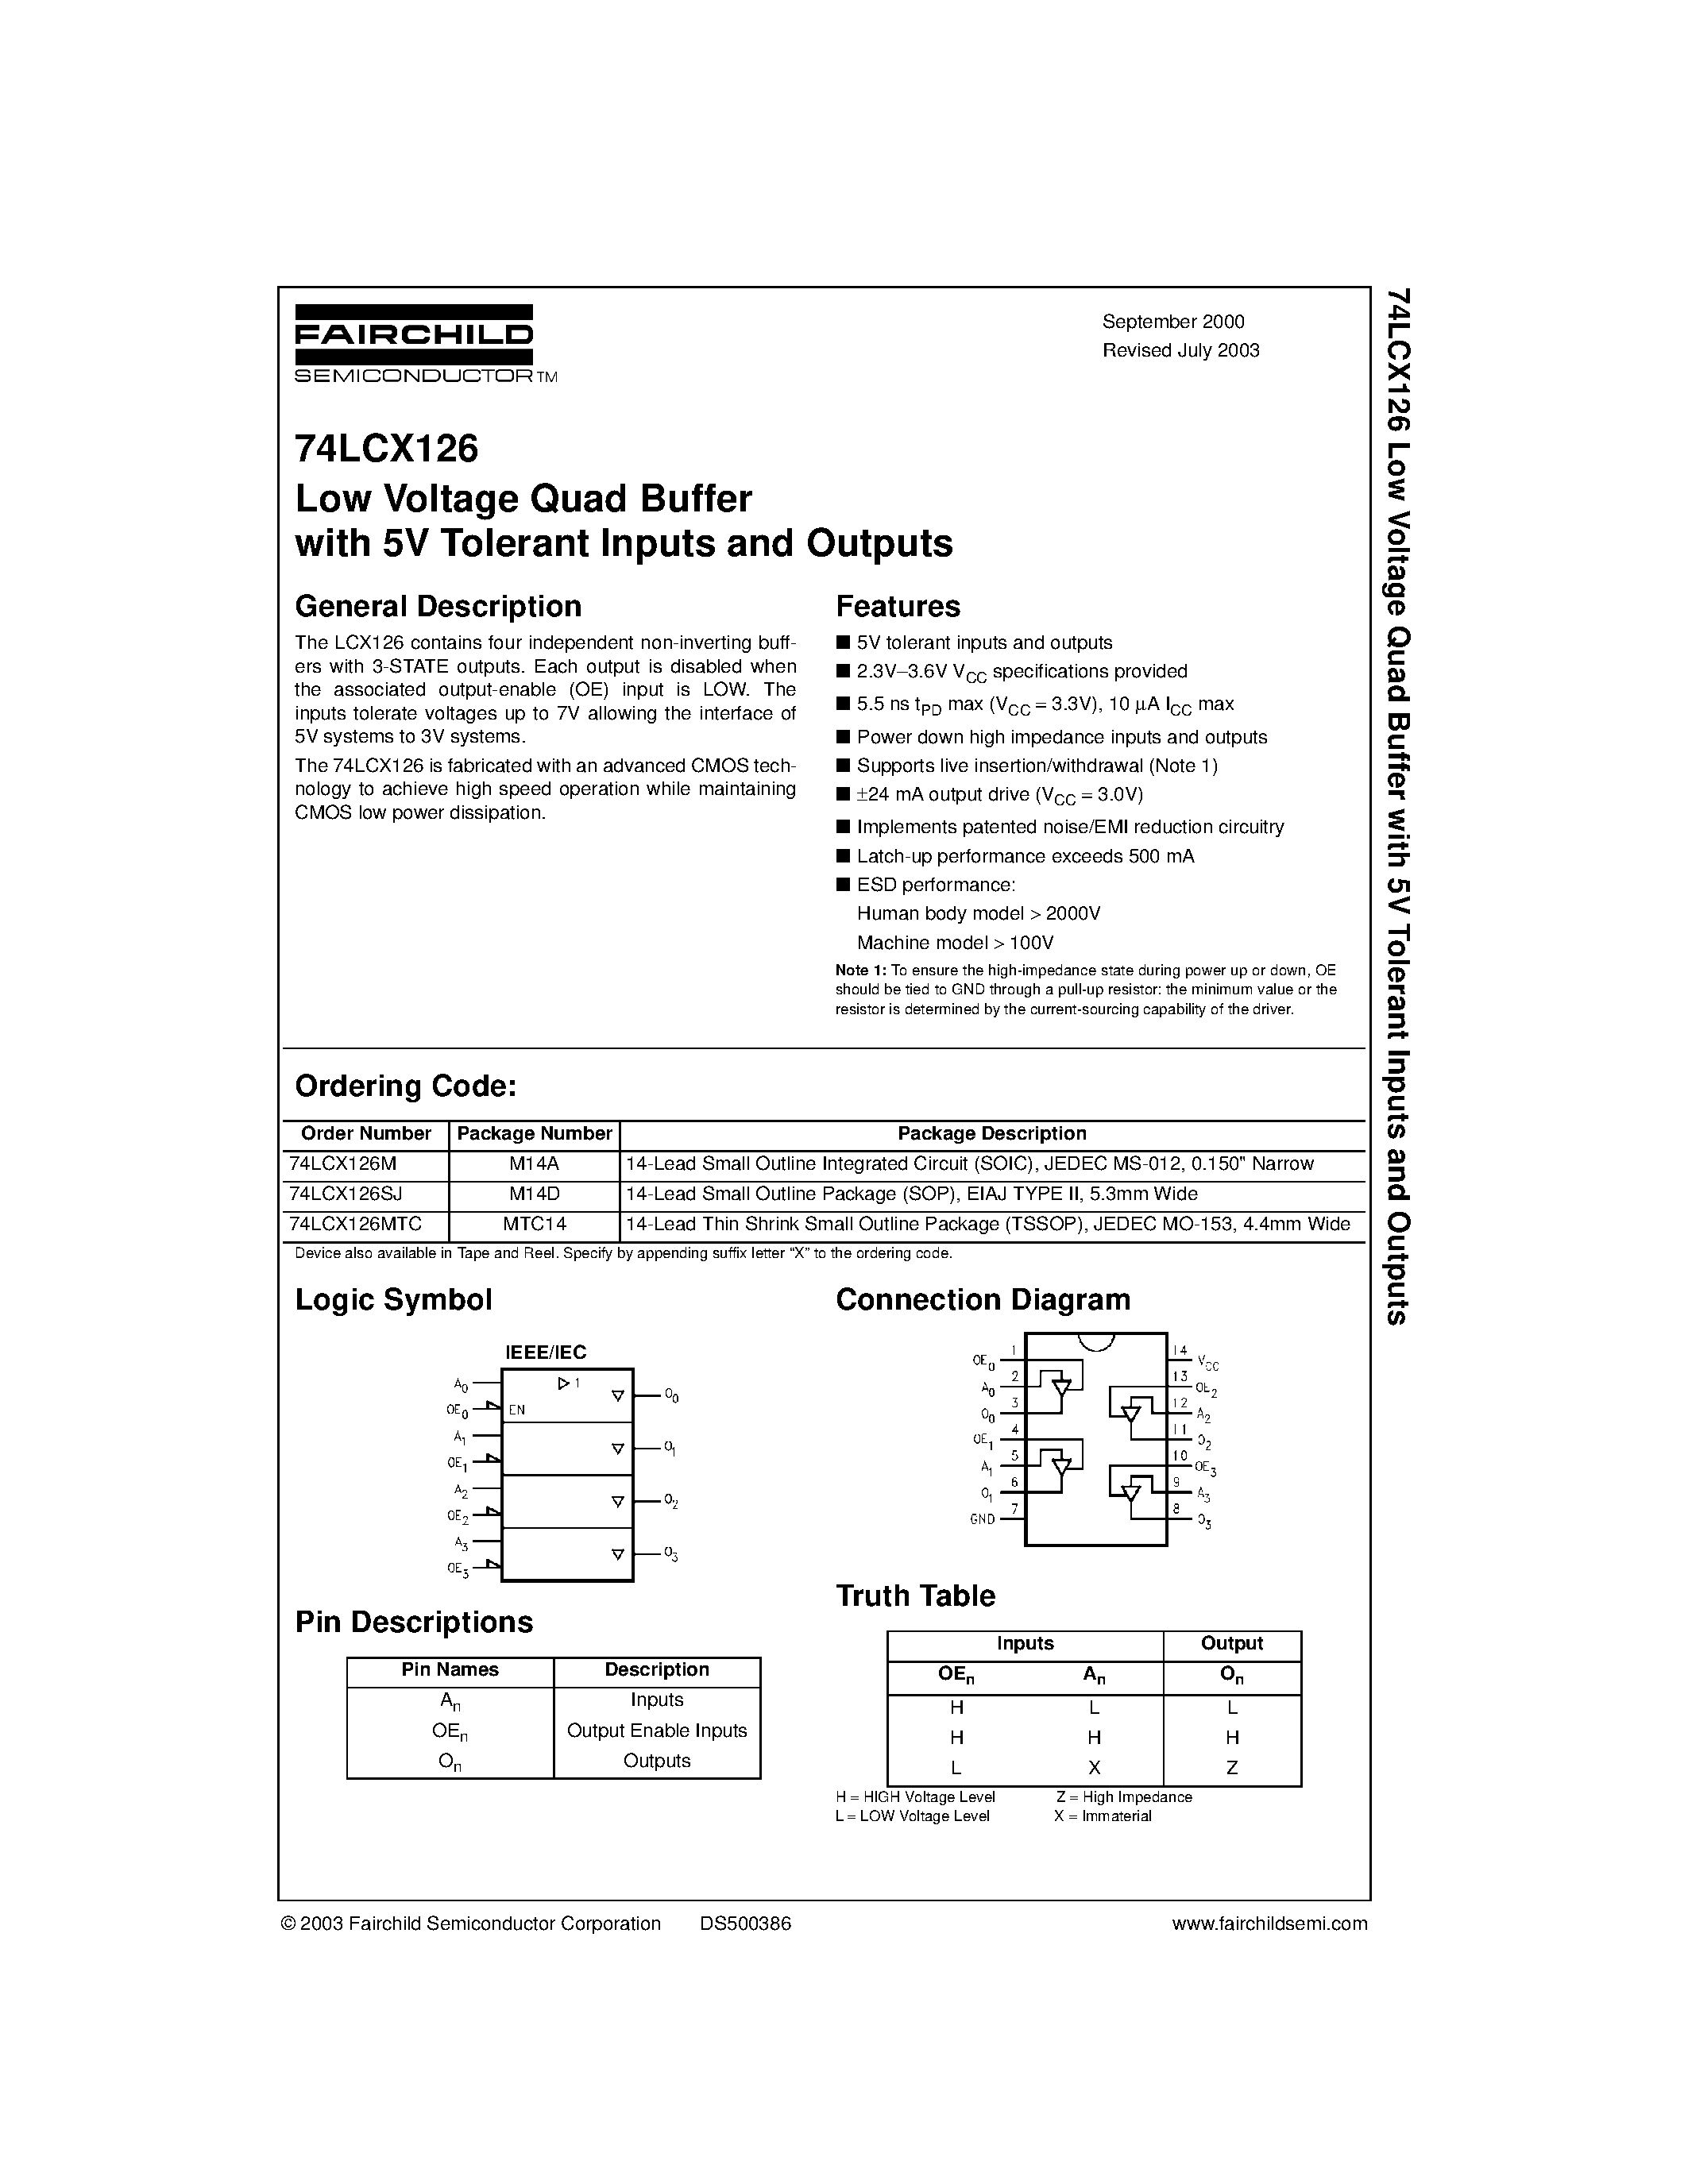 Datasheet 74LCX126 - Low Voltage Quad Buffer with 5V Tolerant Inputs and Outputs page 1